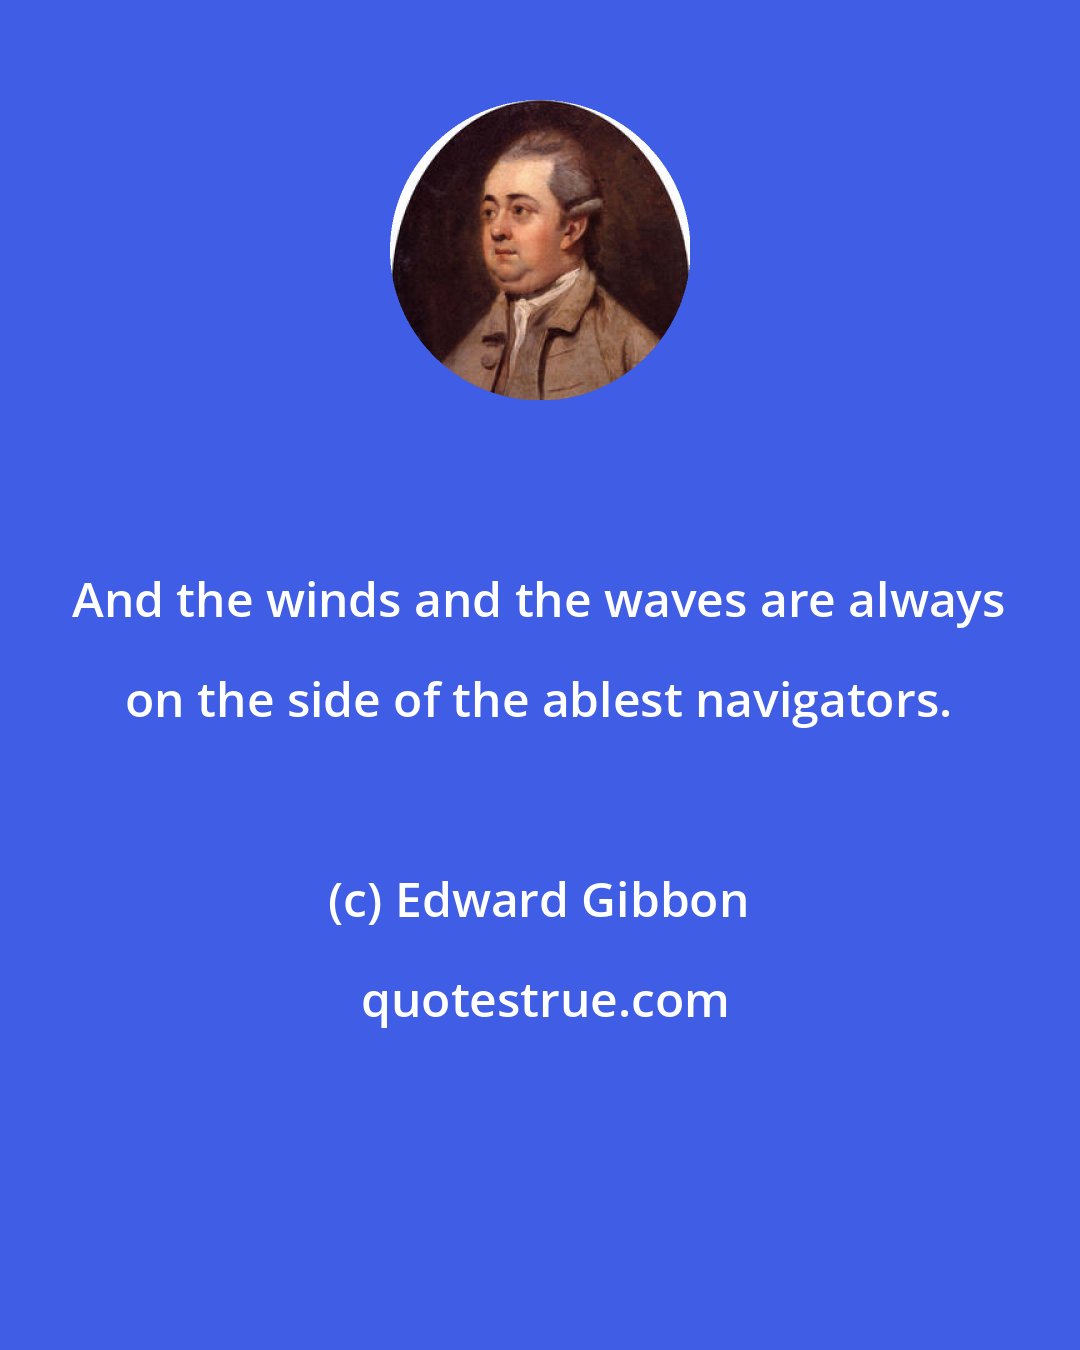 Edward Gibbon: And the winds and the waves are always on the side of the ablest navigators.